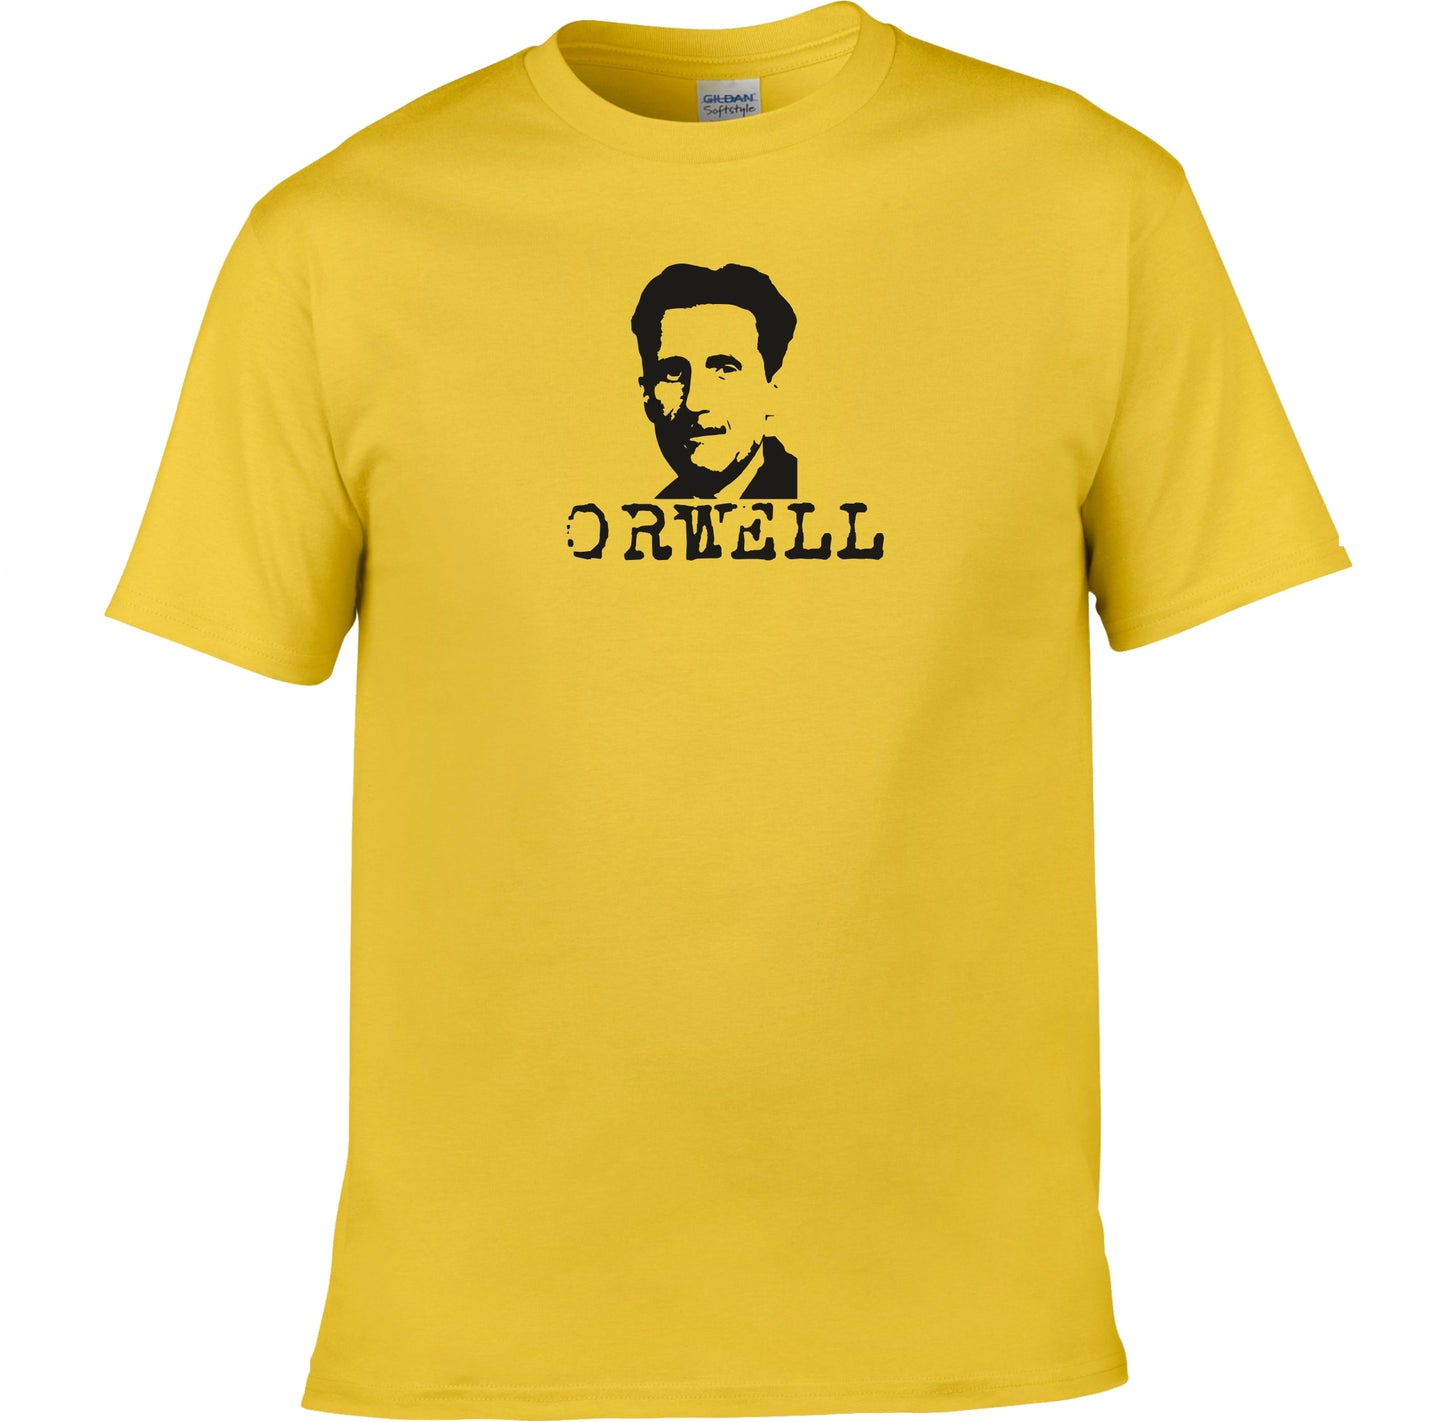 George Orwell T-shirt - 1984, Various Colour T Shirts, S-XXL